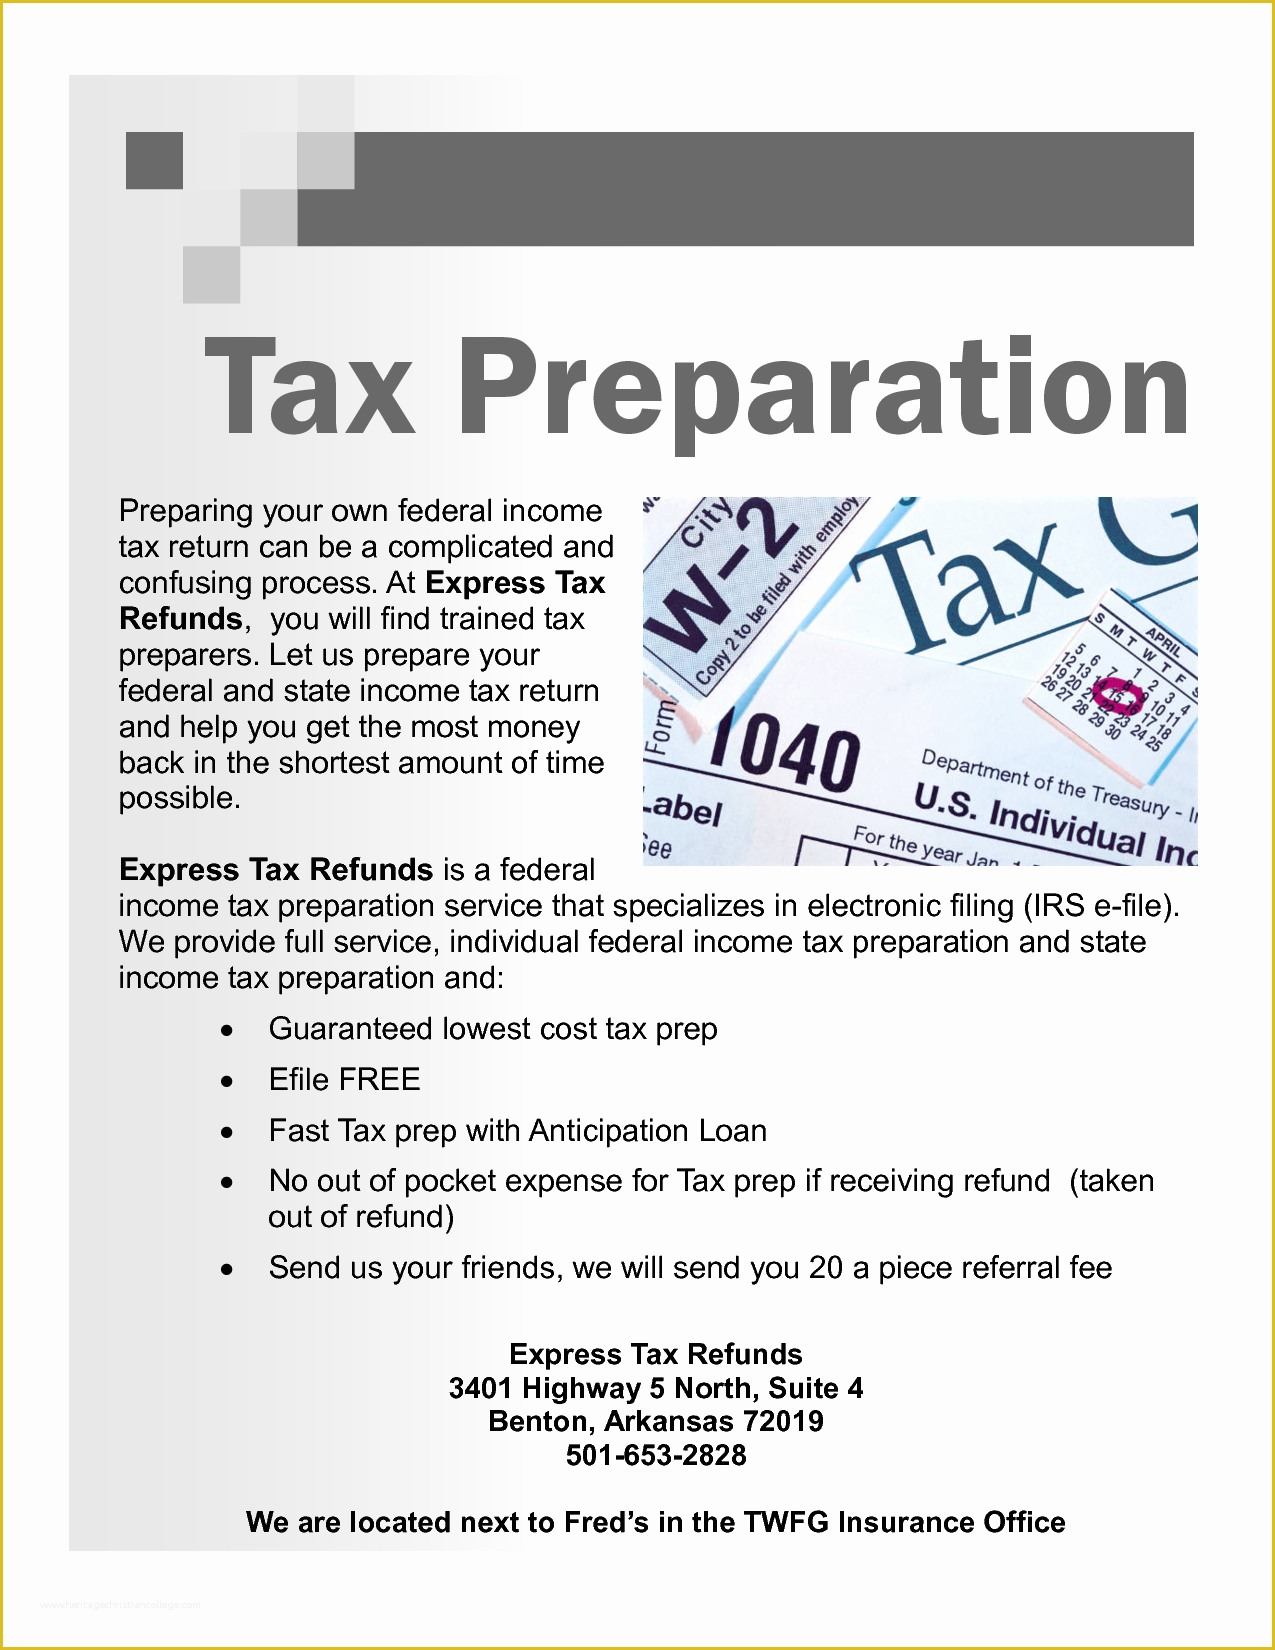 Free Tax Preparation Flyers Templates Of In E Tax Flyers Advertising Fly with Open